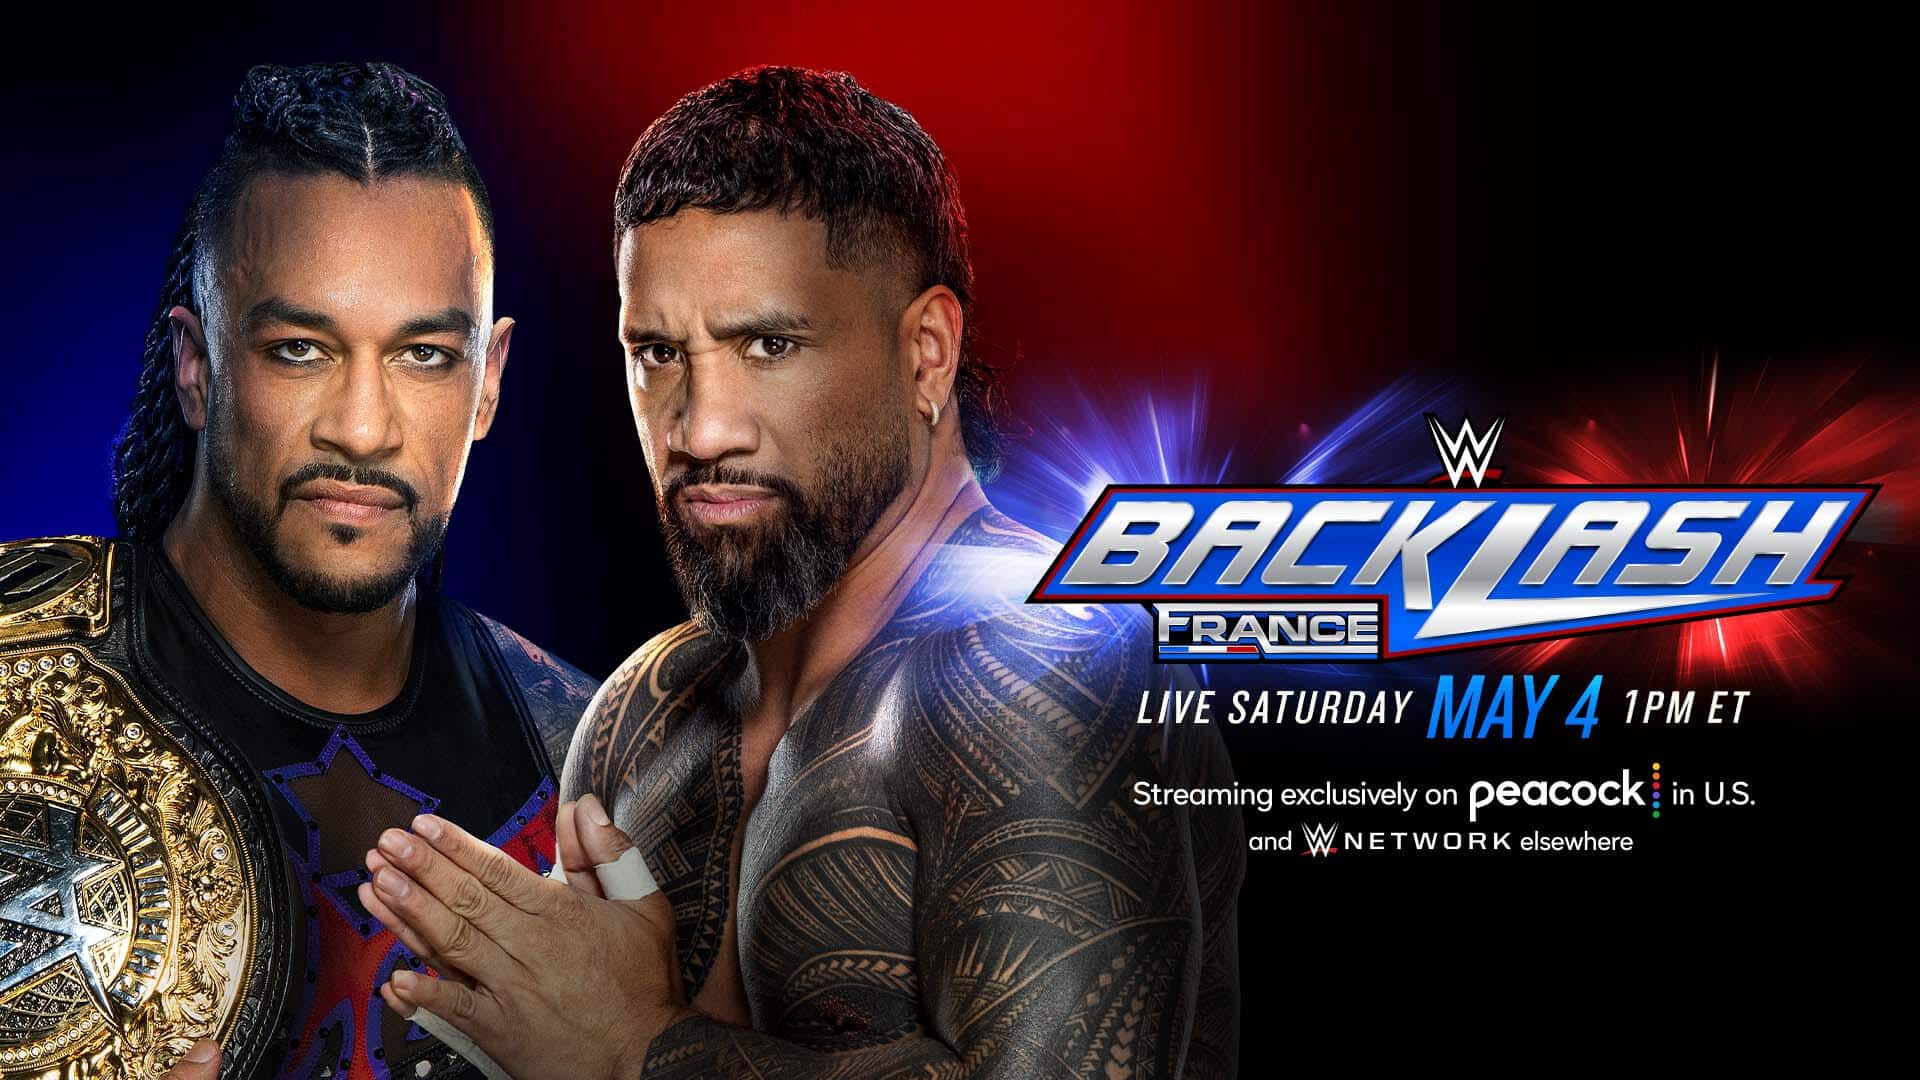 Damian Priest Successfully Defends Title Against Jey Uso at WWE Backlash in France